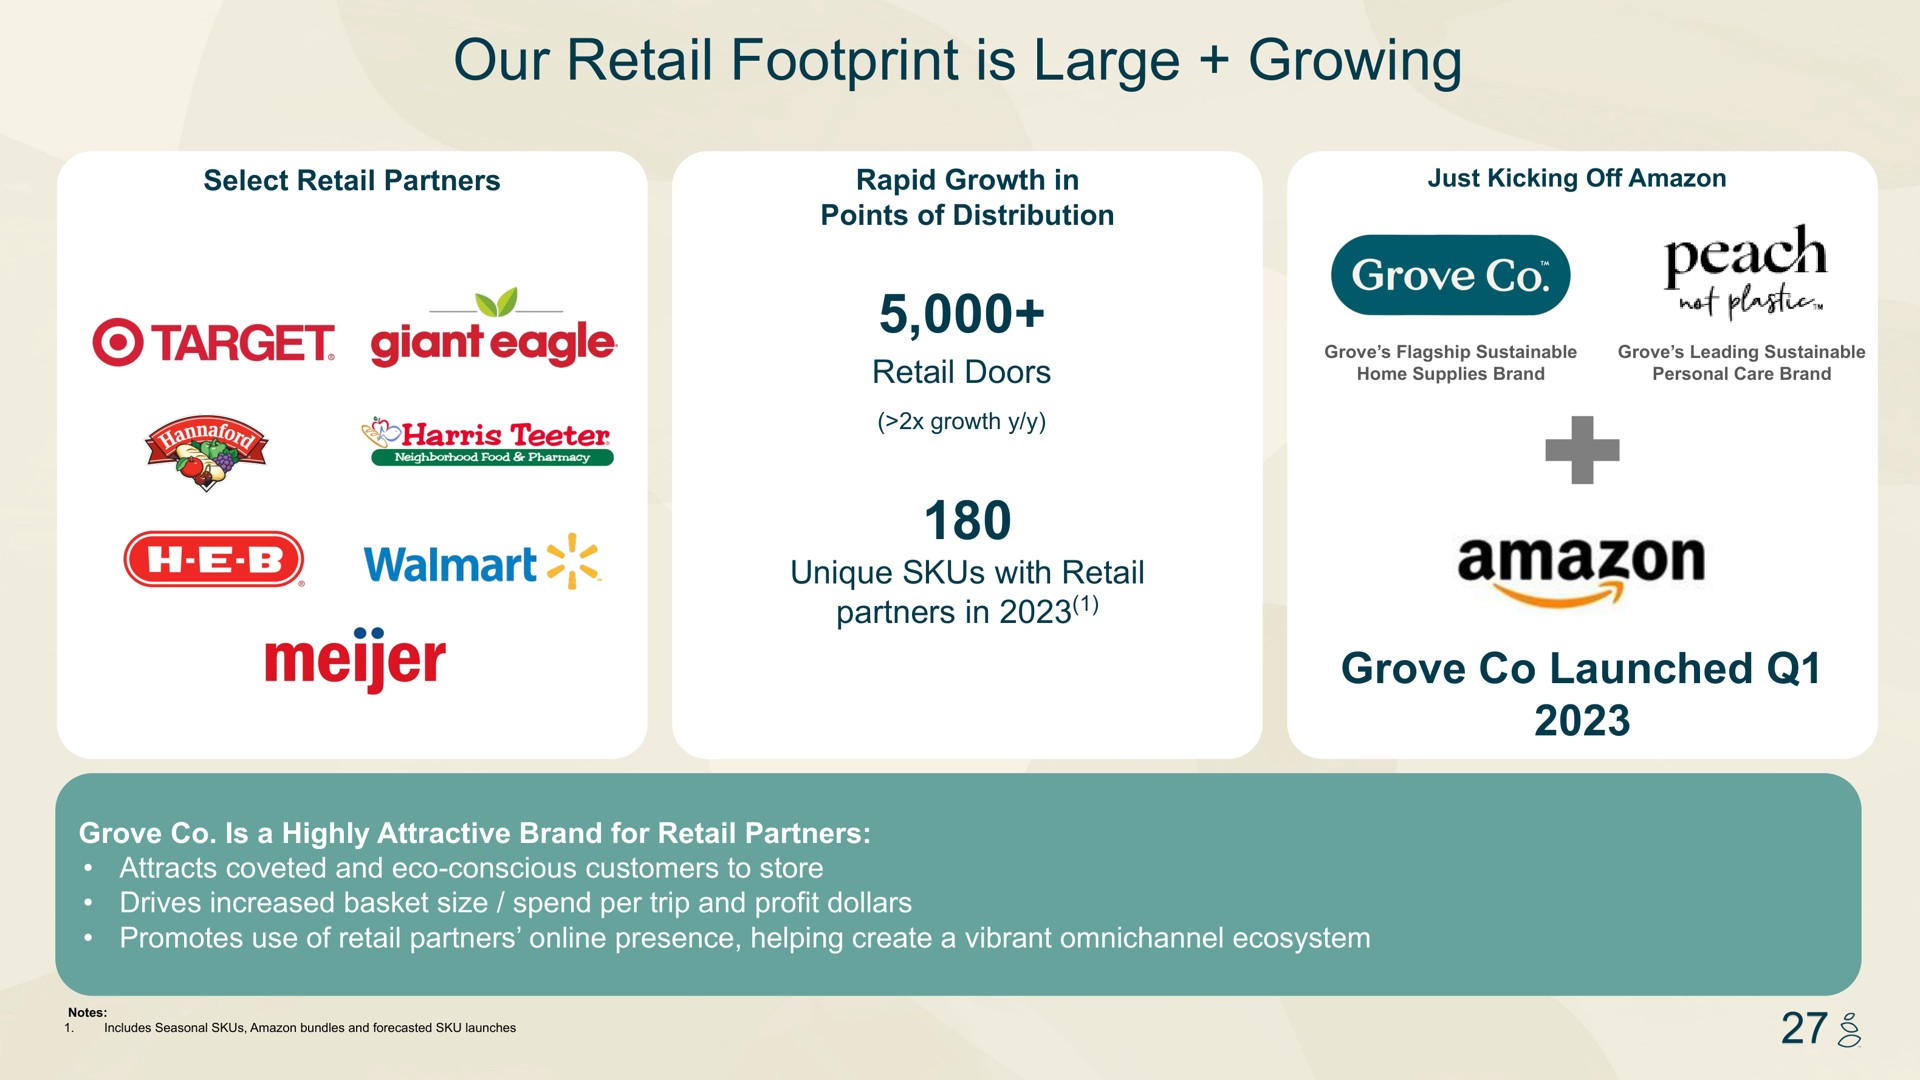 our retail footprint is large growing grove launched unique with peach each | Grove